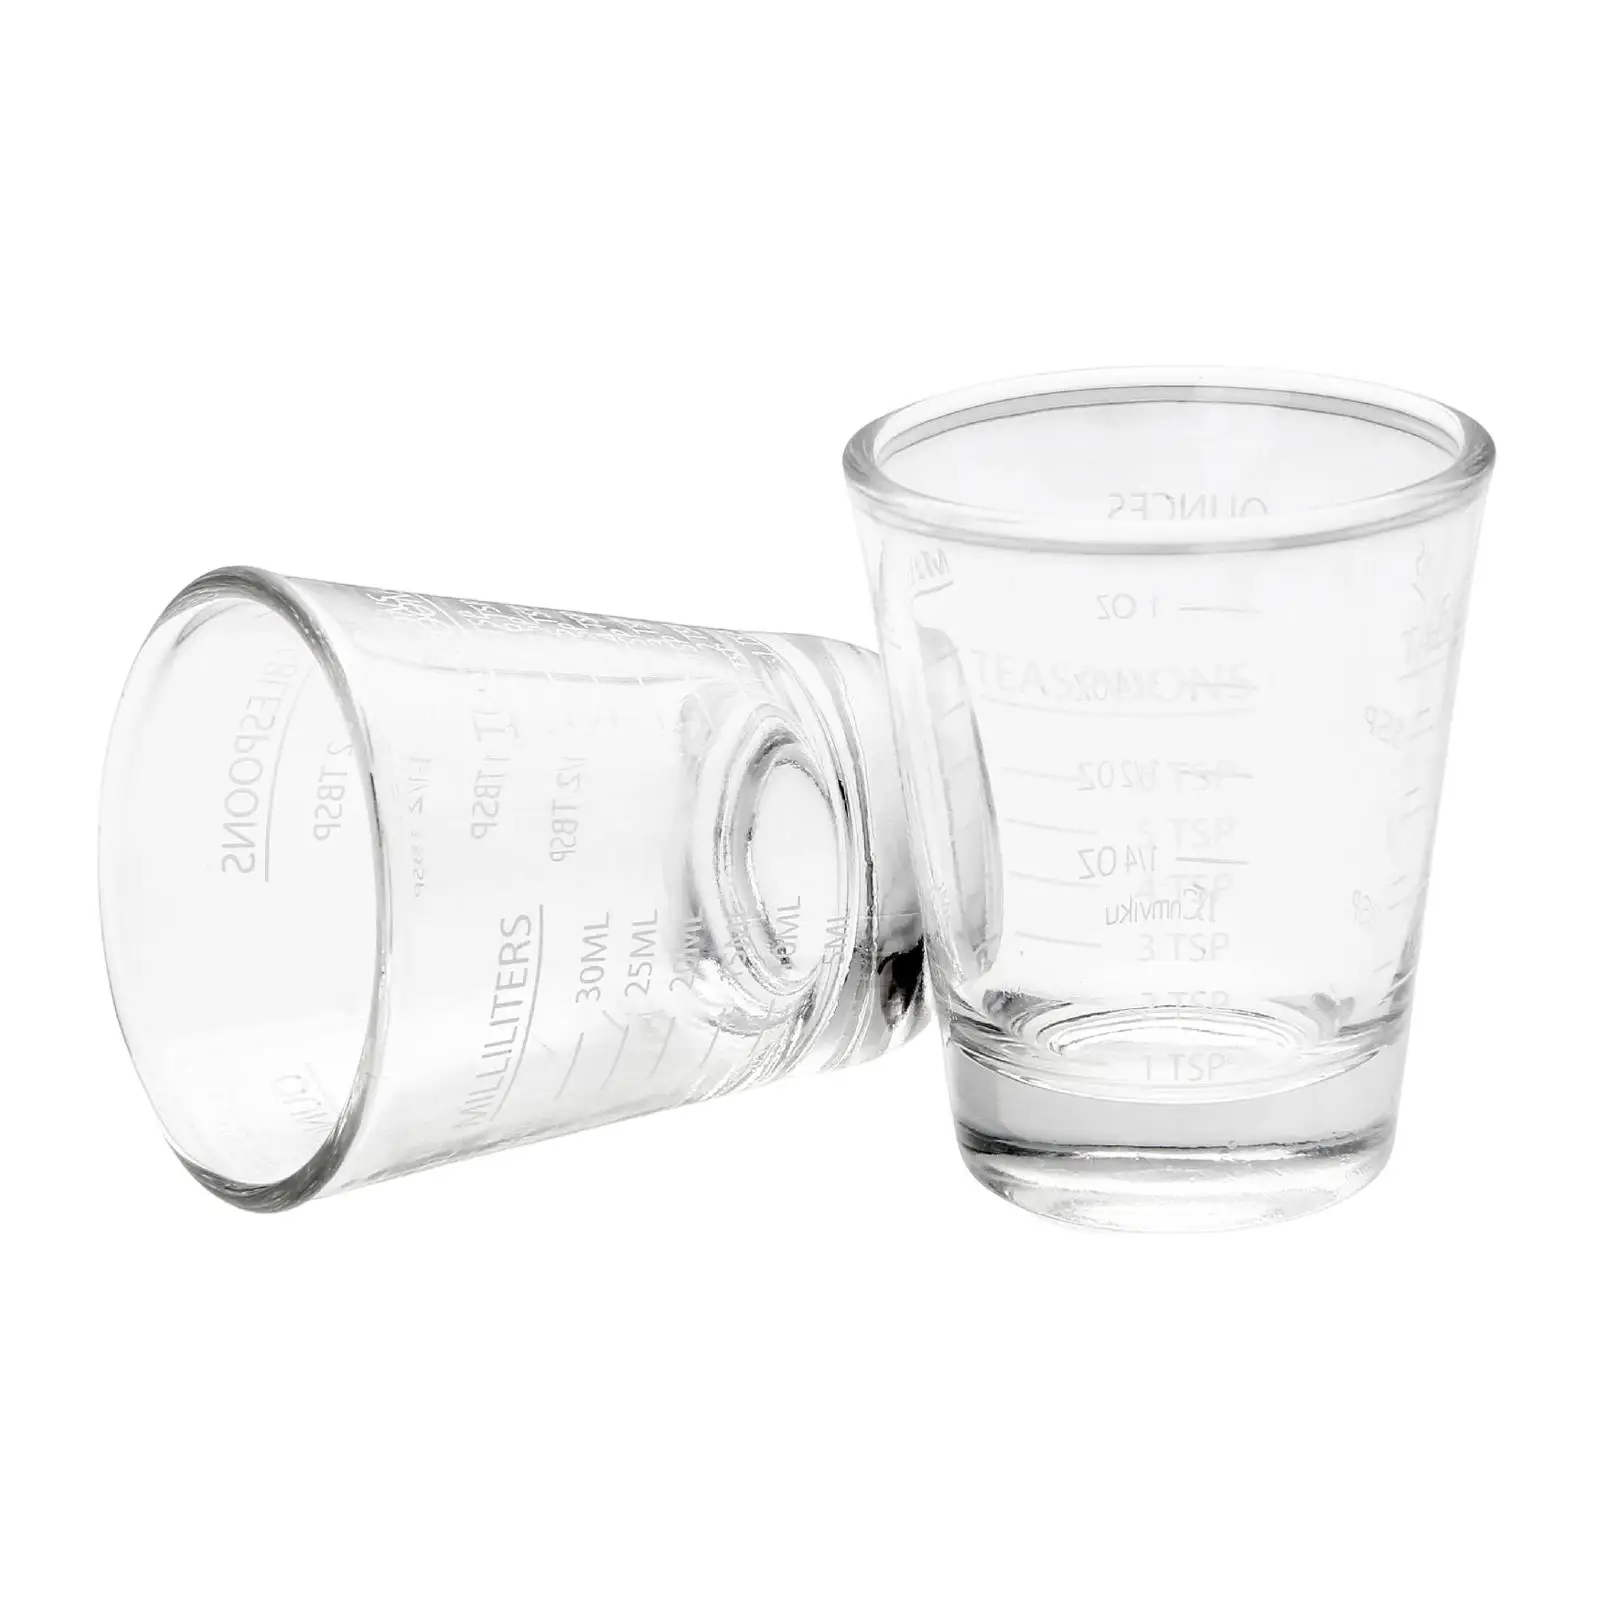 2x 30ml Wine Glasses Baking Measuring Cup Small Milk Cup for Restaurants Bar